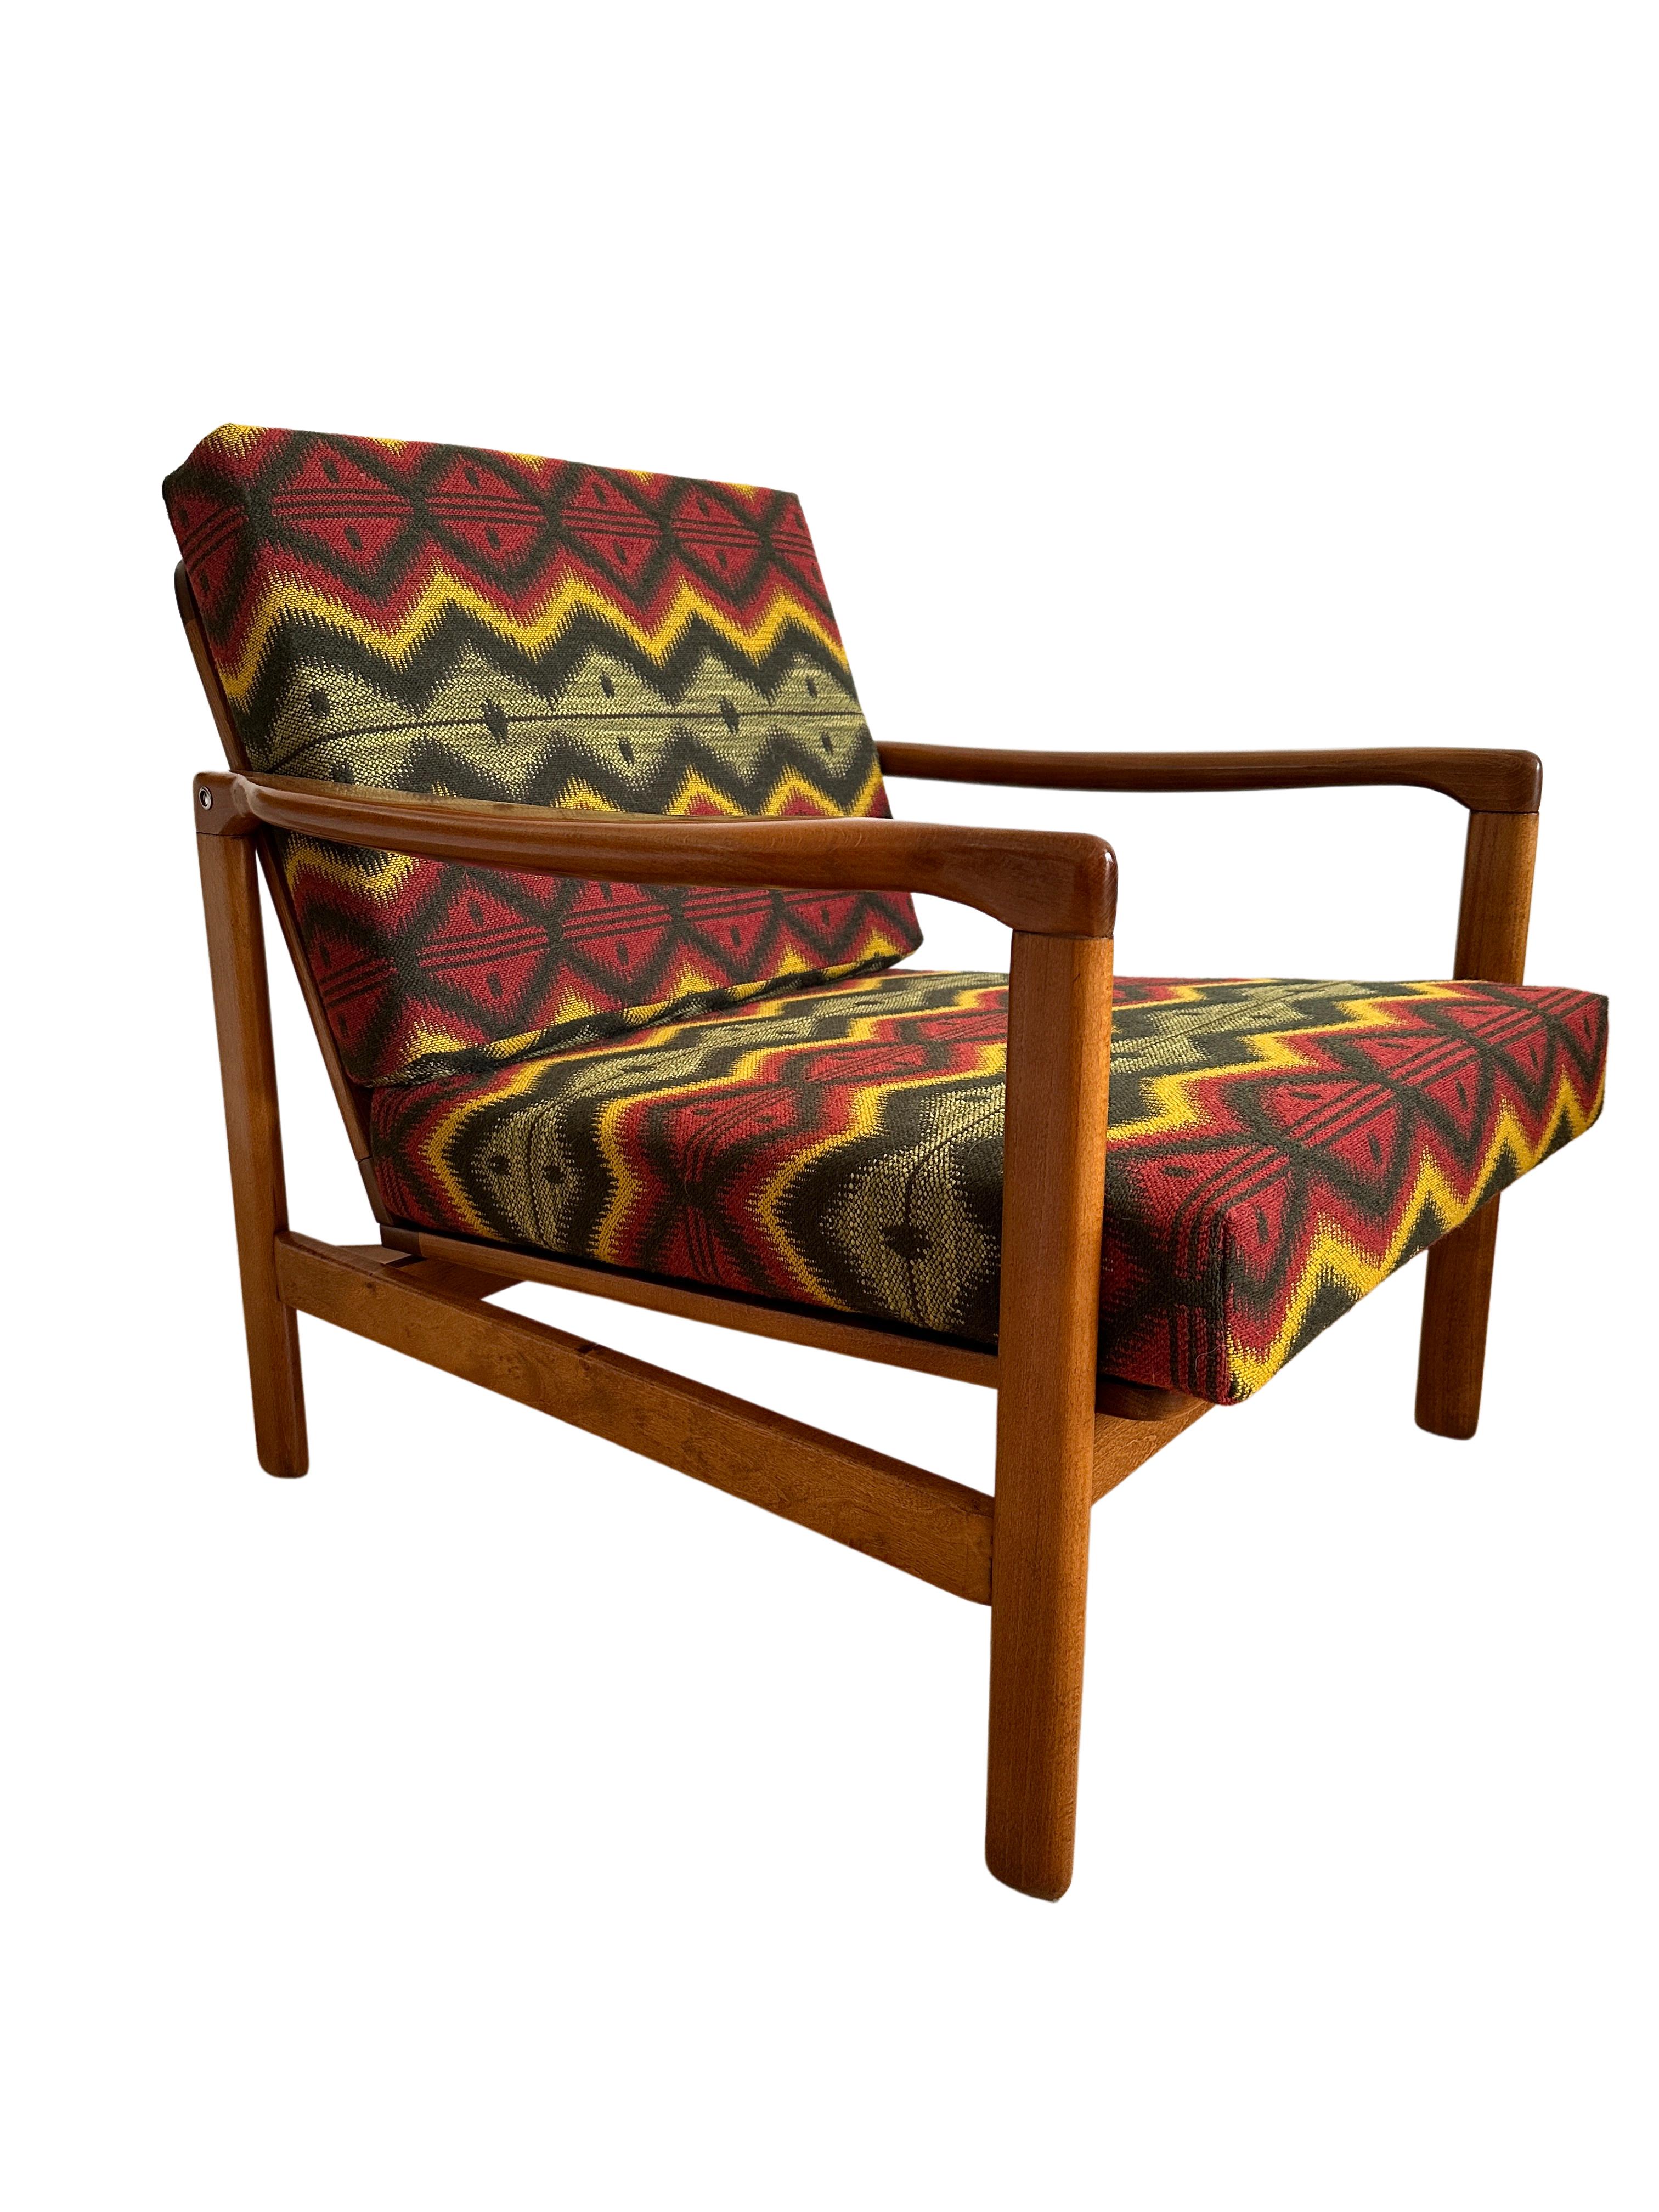 Set of Two Armchairs by Zenon Bączyk, Mind the Gap Upholstery, Europe, 1960s For Sale 7